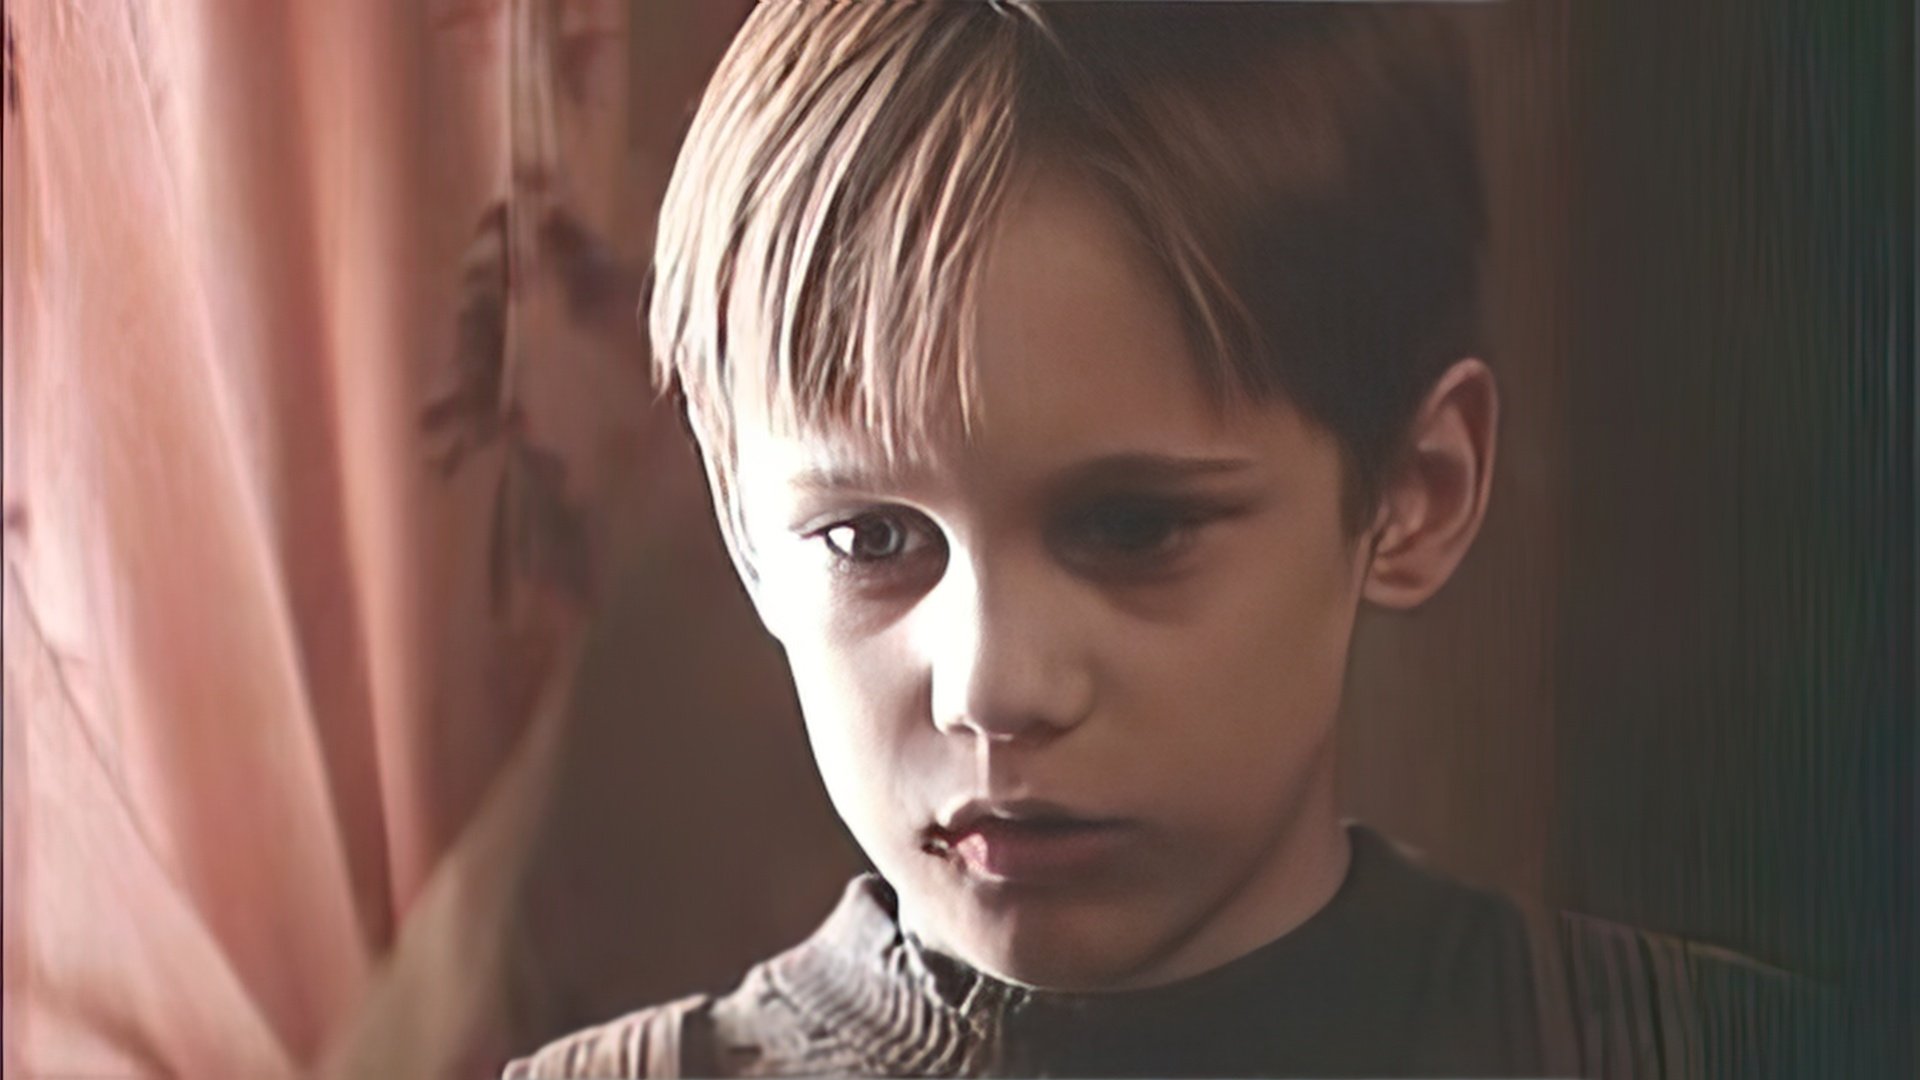 Alexander Skarsgård played his first role when he was 8 years old